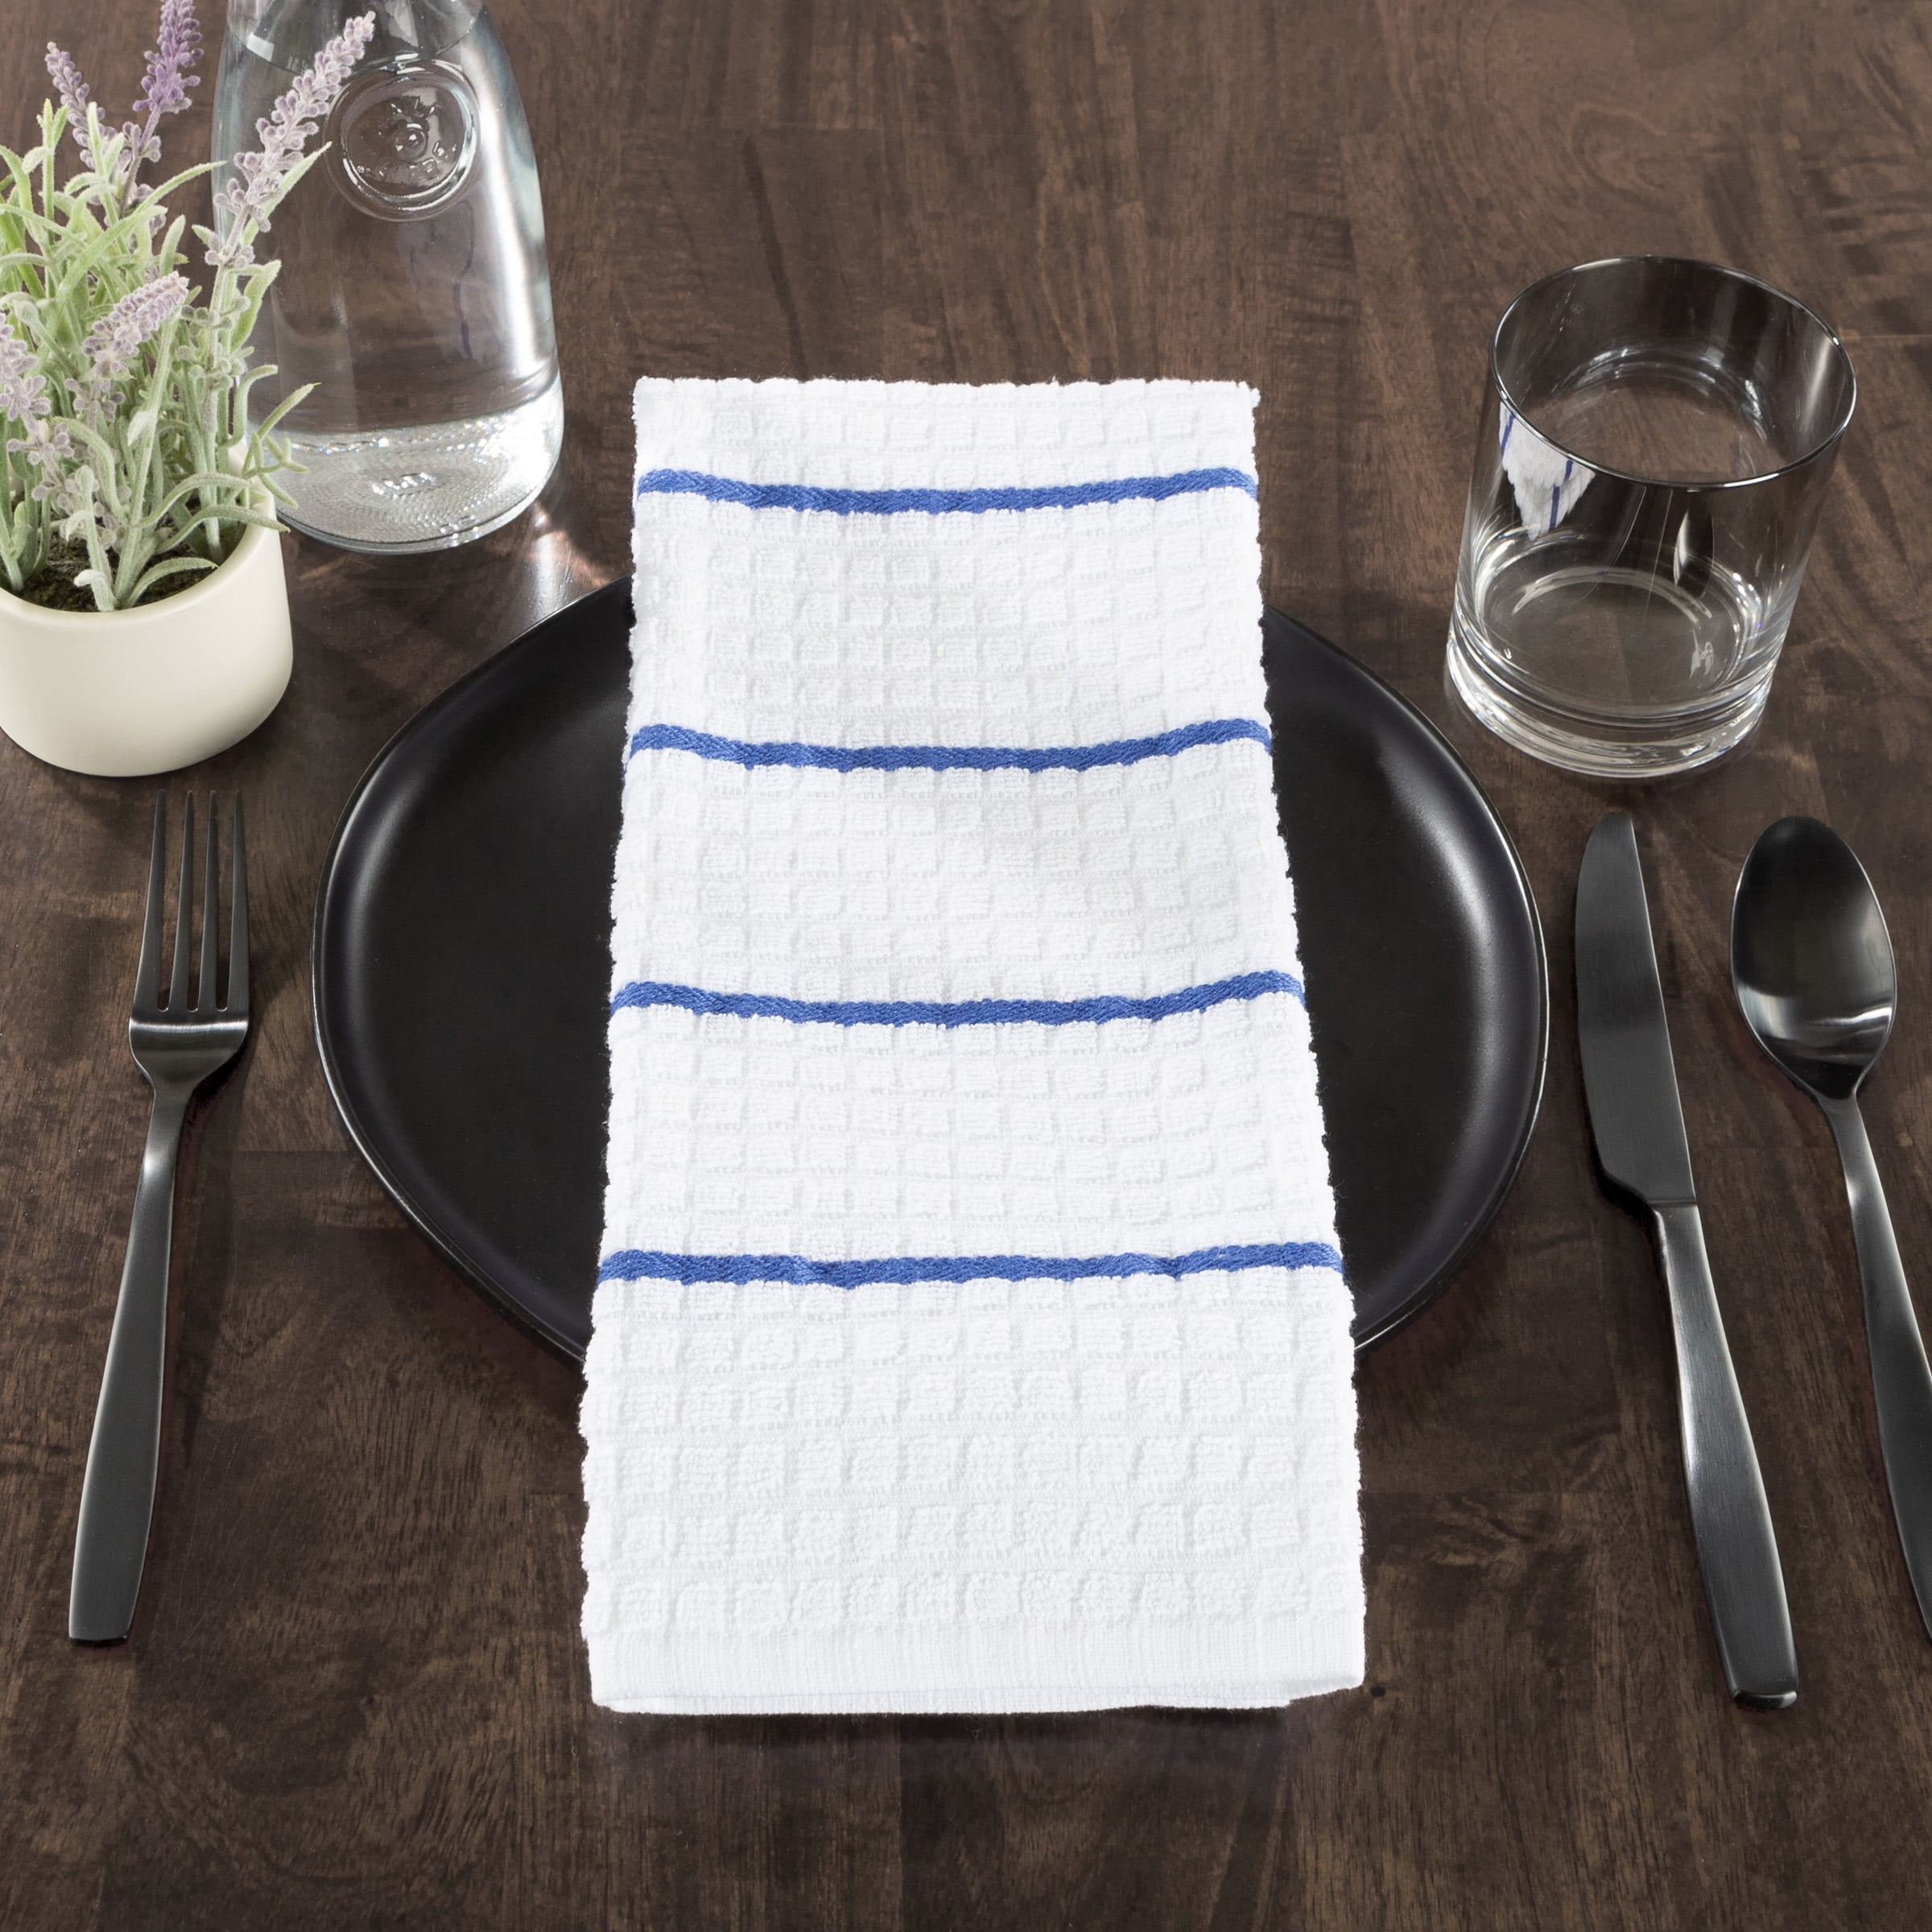 Stitch and Weft 3-Pack Striped Kitchen Tea Towels Size 28x18